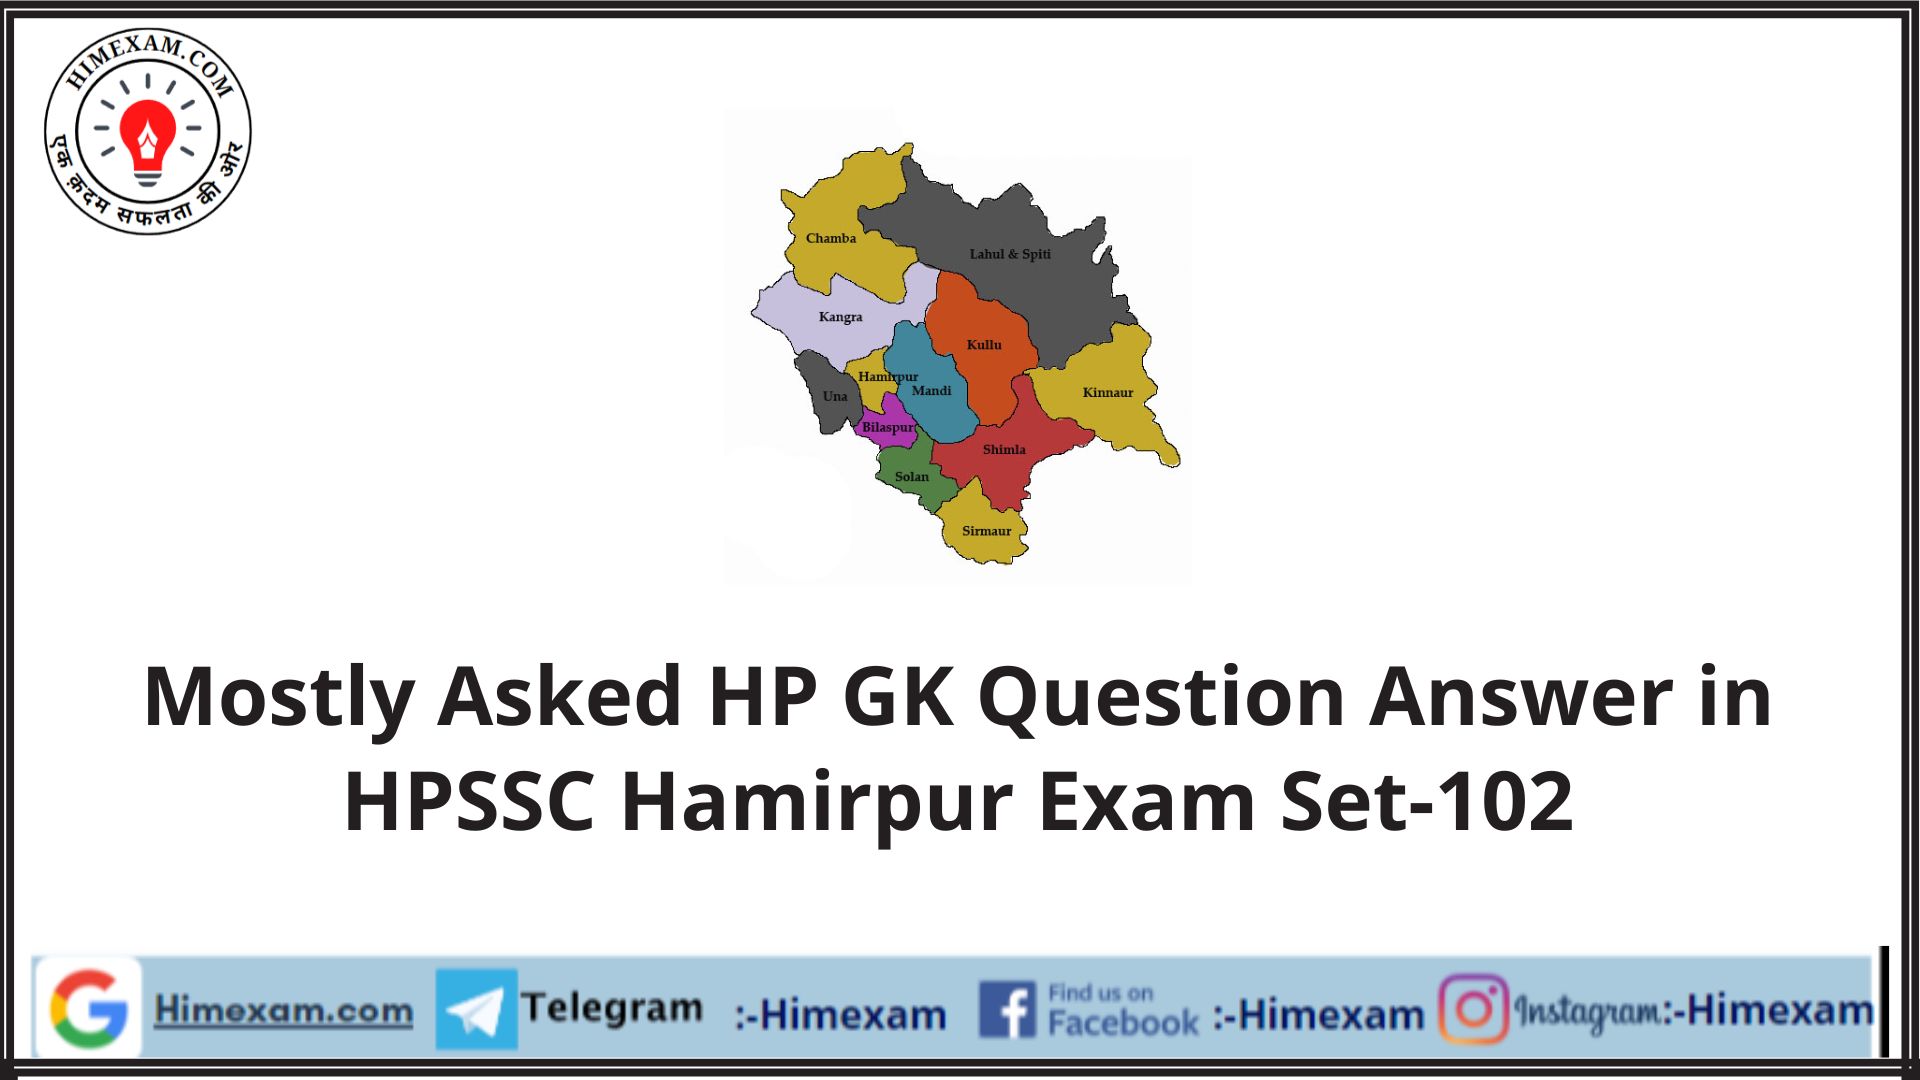 Mostly Asked HP GK Question Answer in HPSSC Hamirpur Exam Set-102